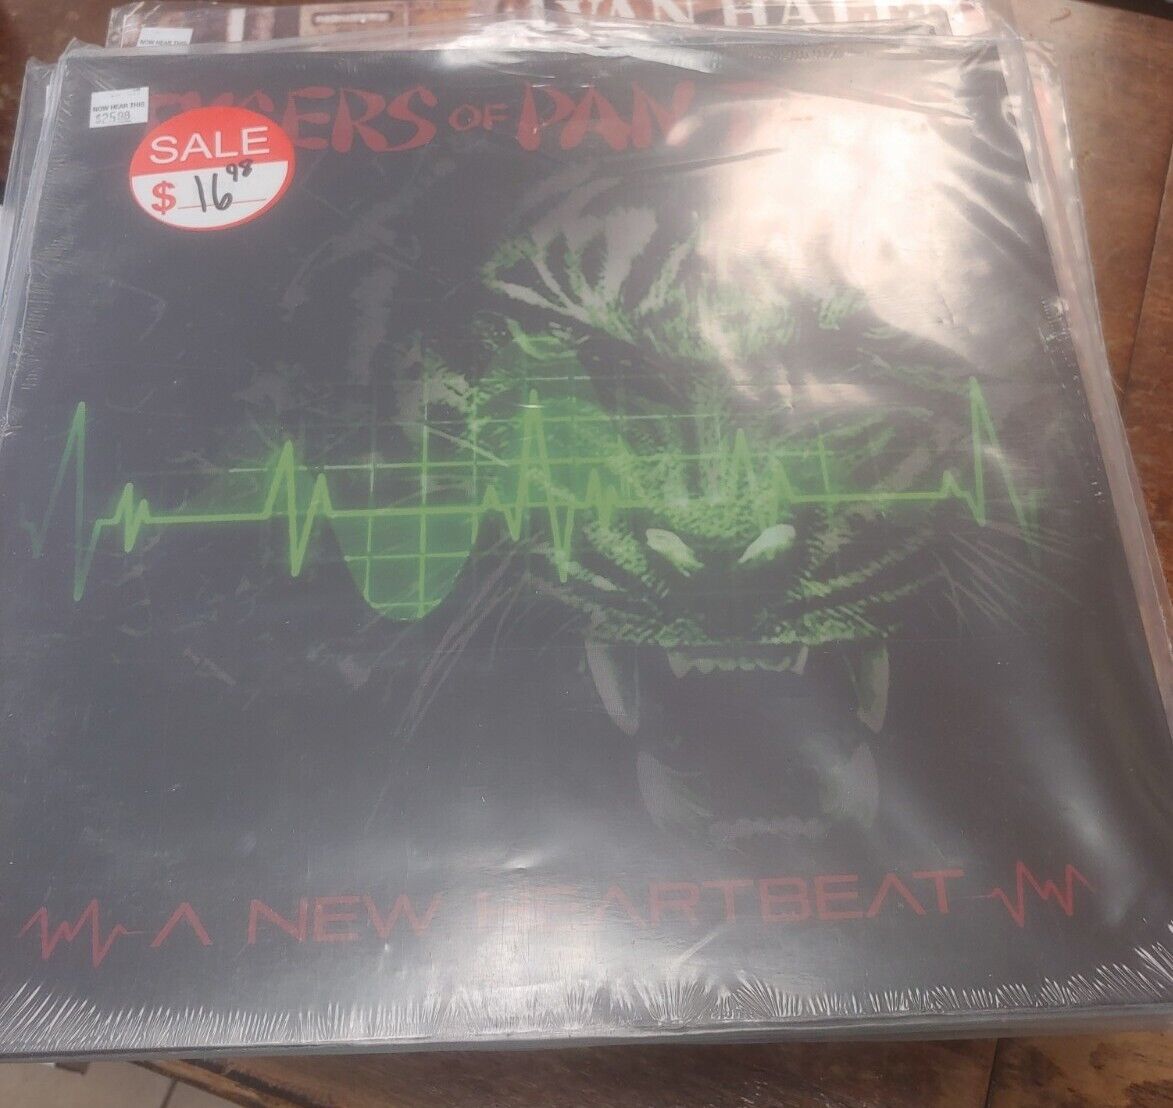 TYGERS OF PAN TANG - A NEW HEARTBEAT LP BRAND NEW VINYL RECORD